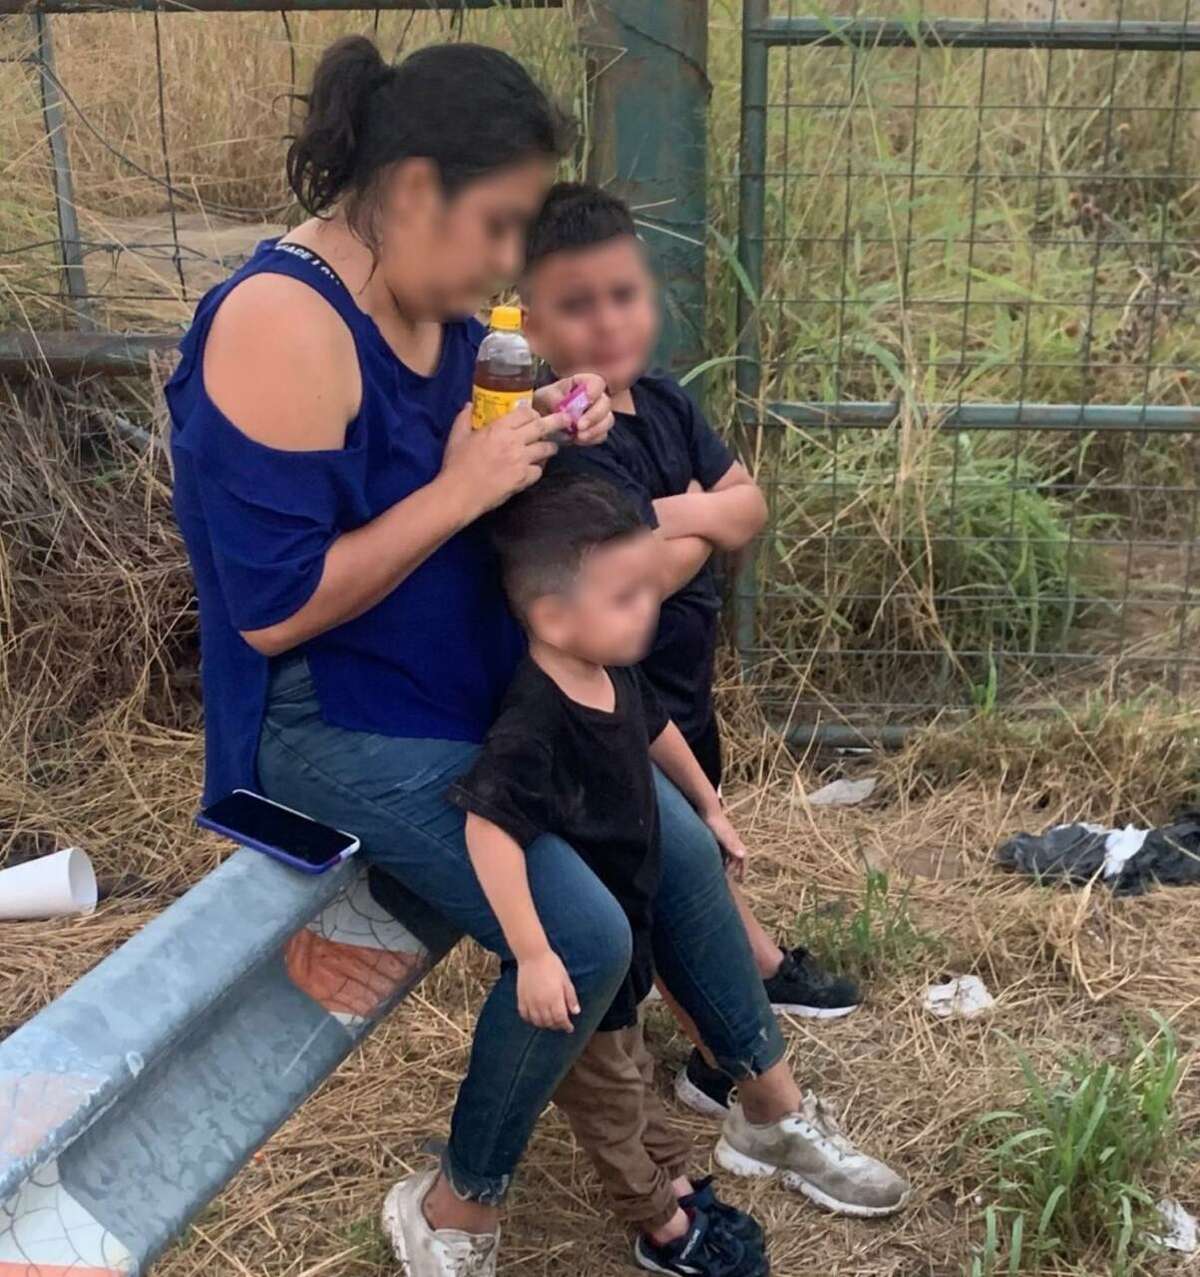 U.S. Border Patrol agents said they rescued these two children from the current on the Rio Grande. The children were turned over to their mother, who was part of a group of migrants who tried to cross the border illegally.